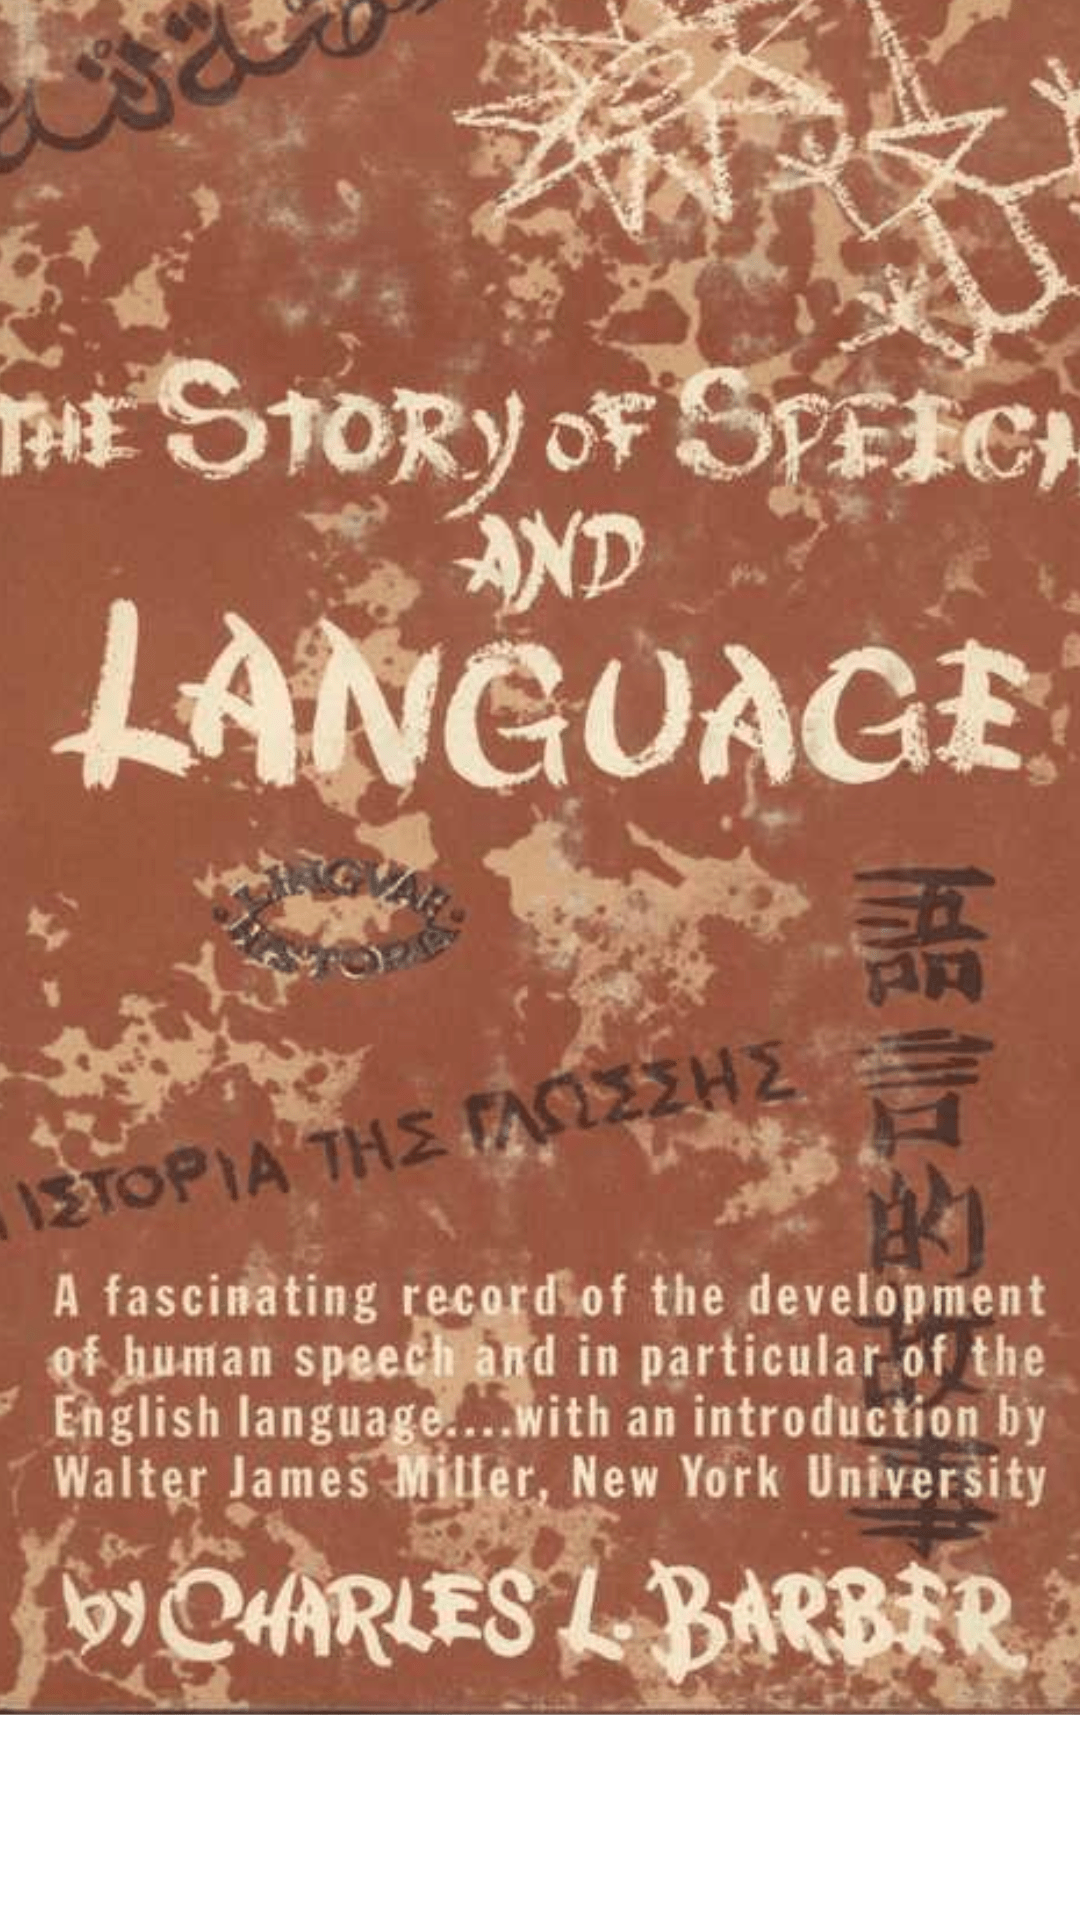 The Story of Speech and Language